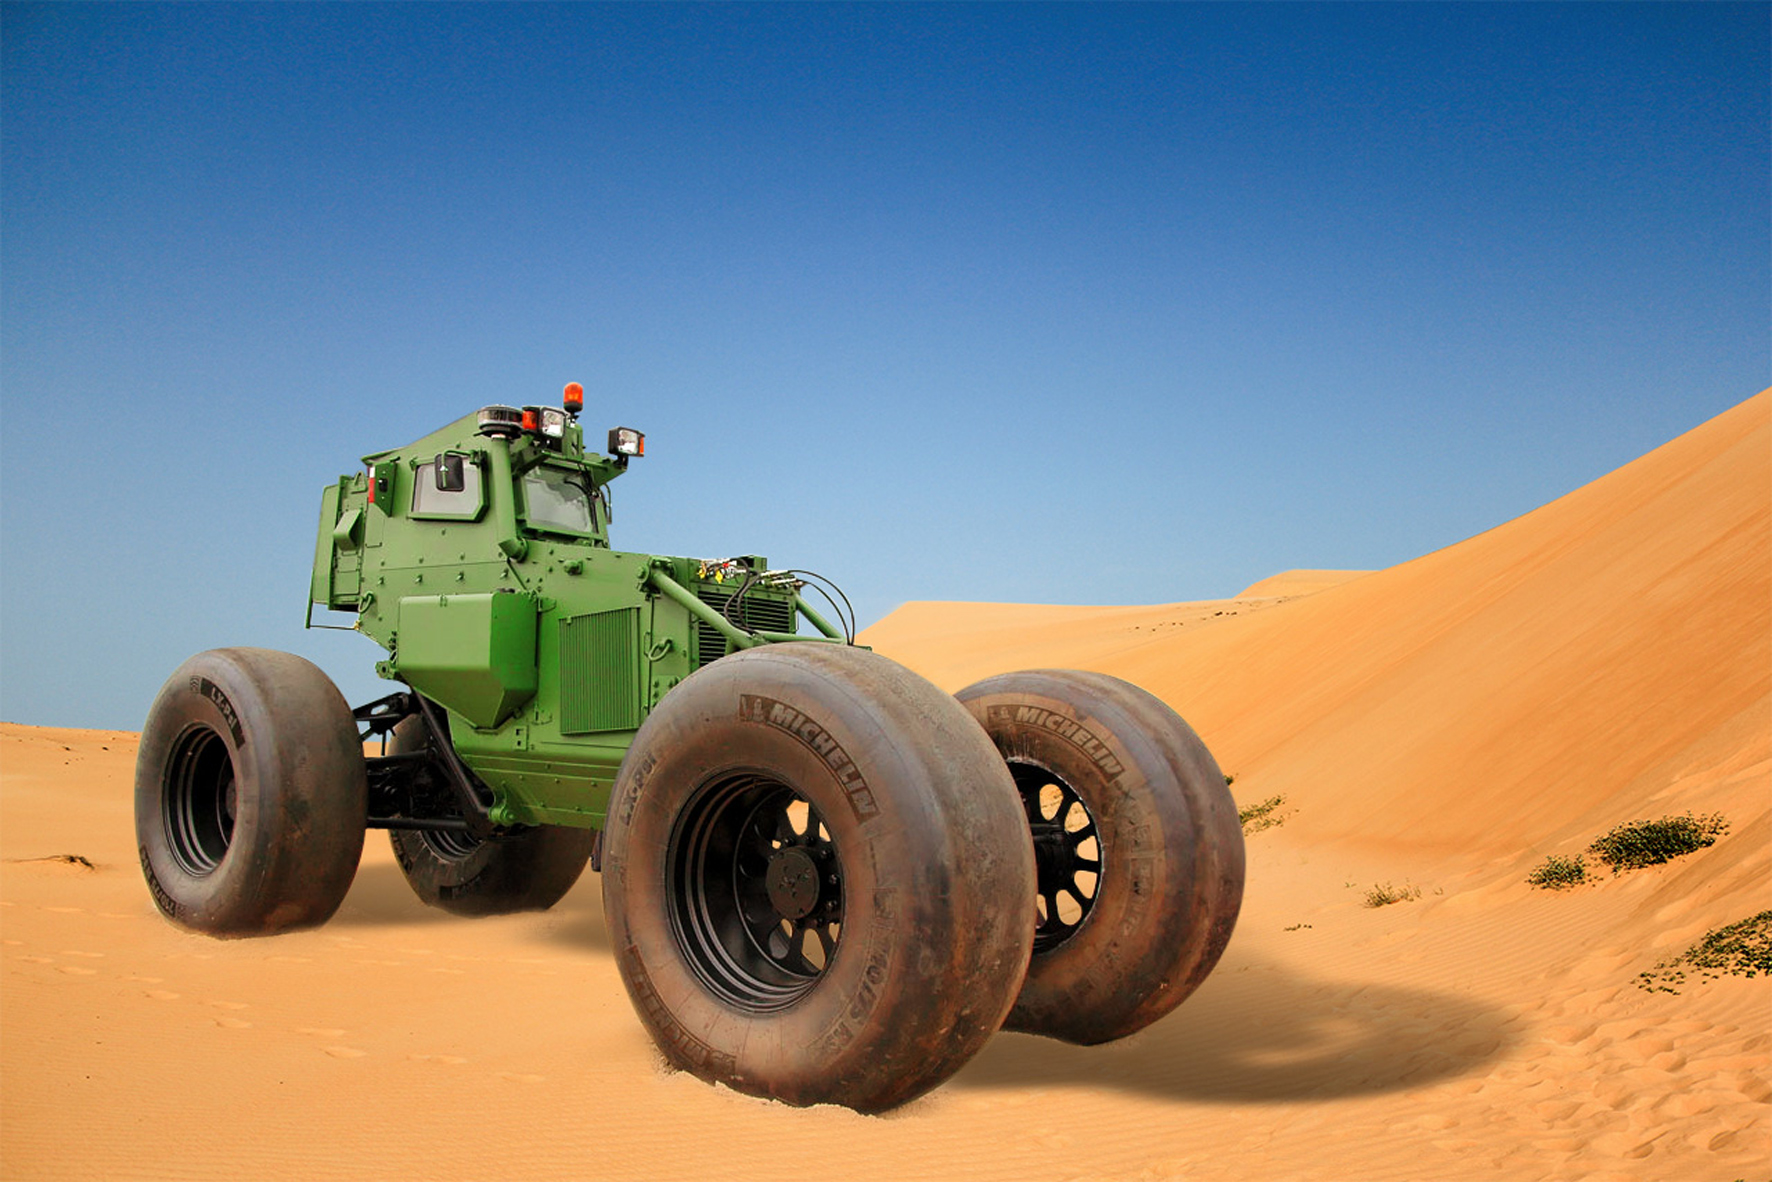 Michelin military tyre SOUVIM II land mine clearing system